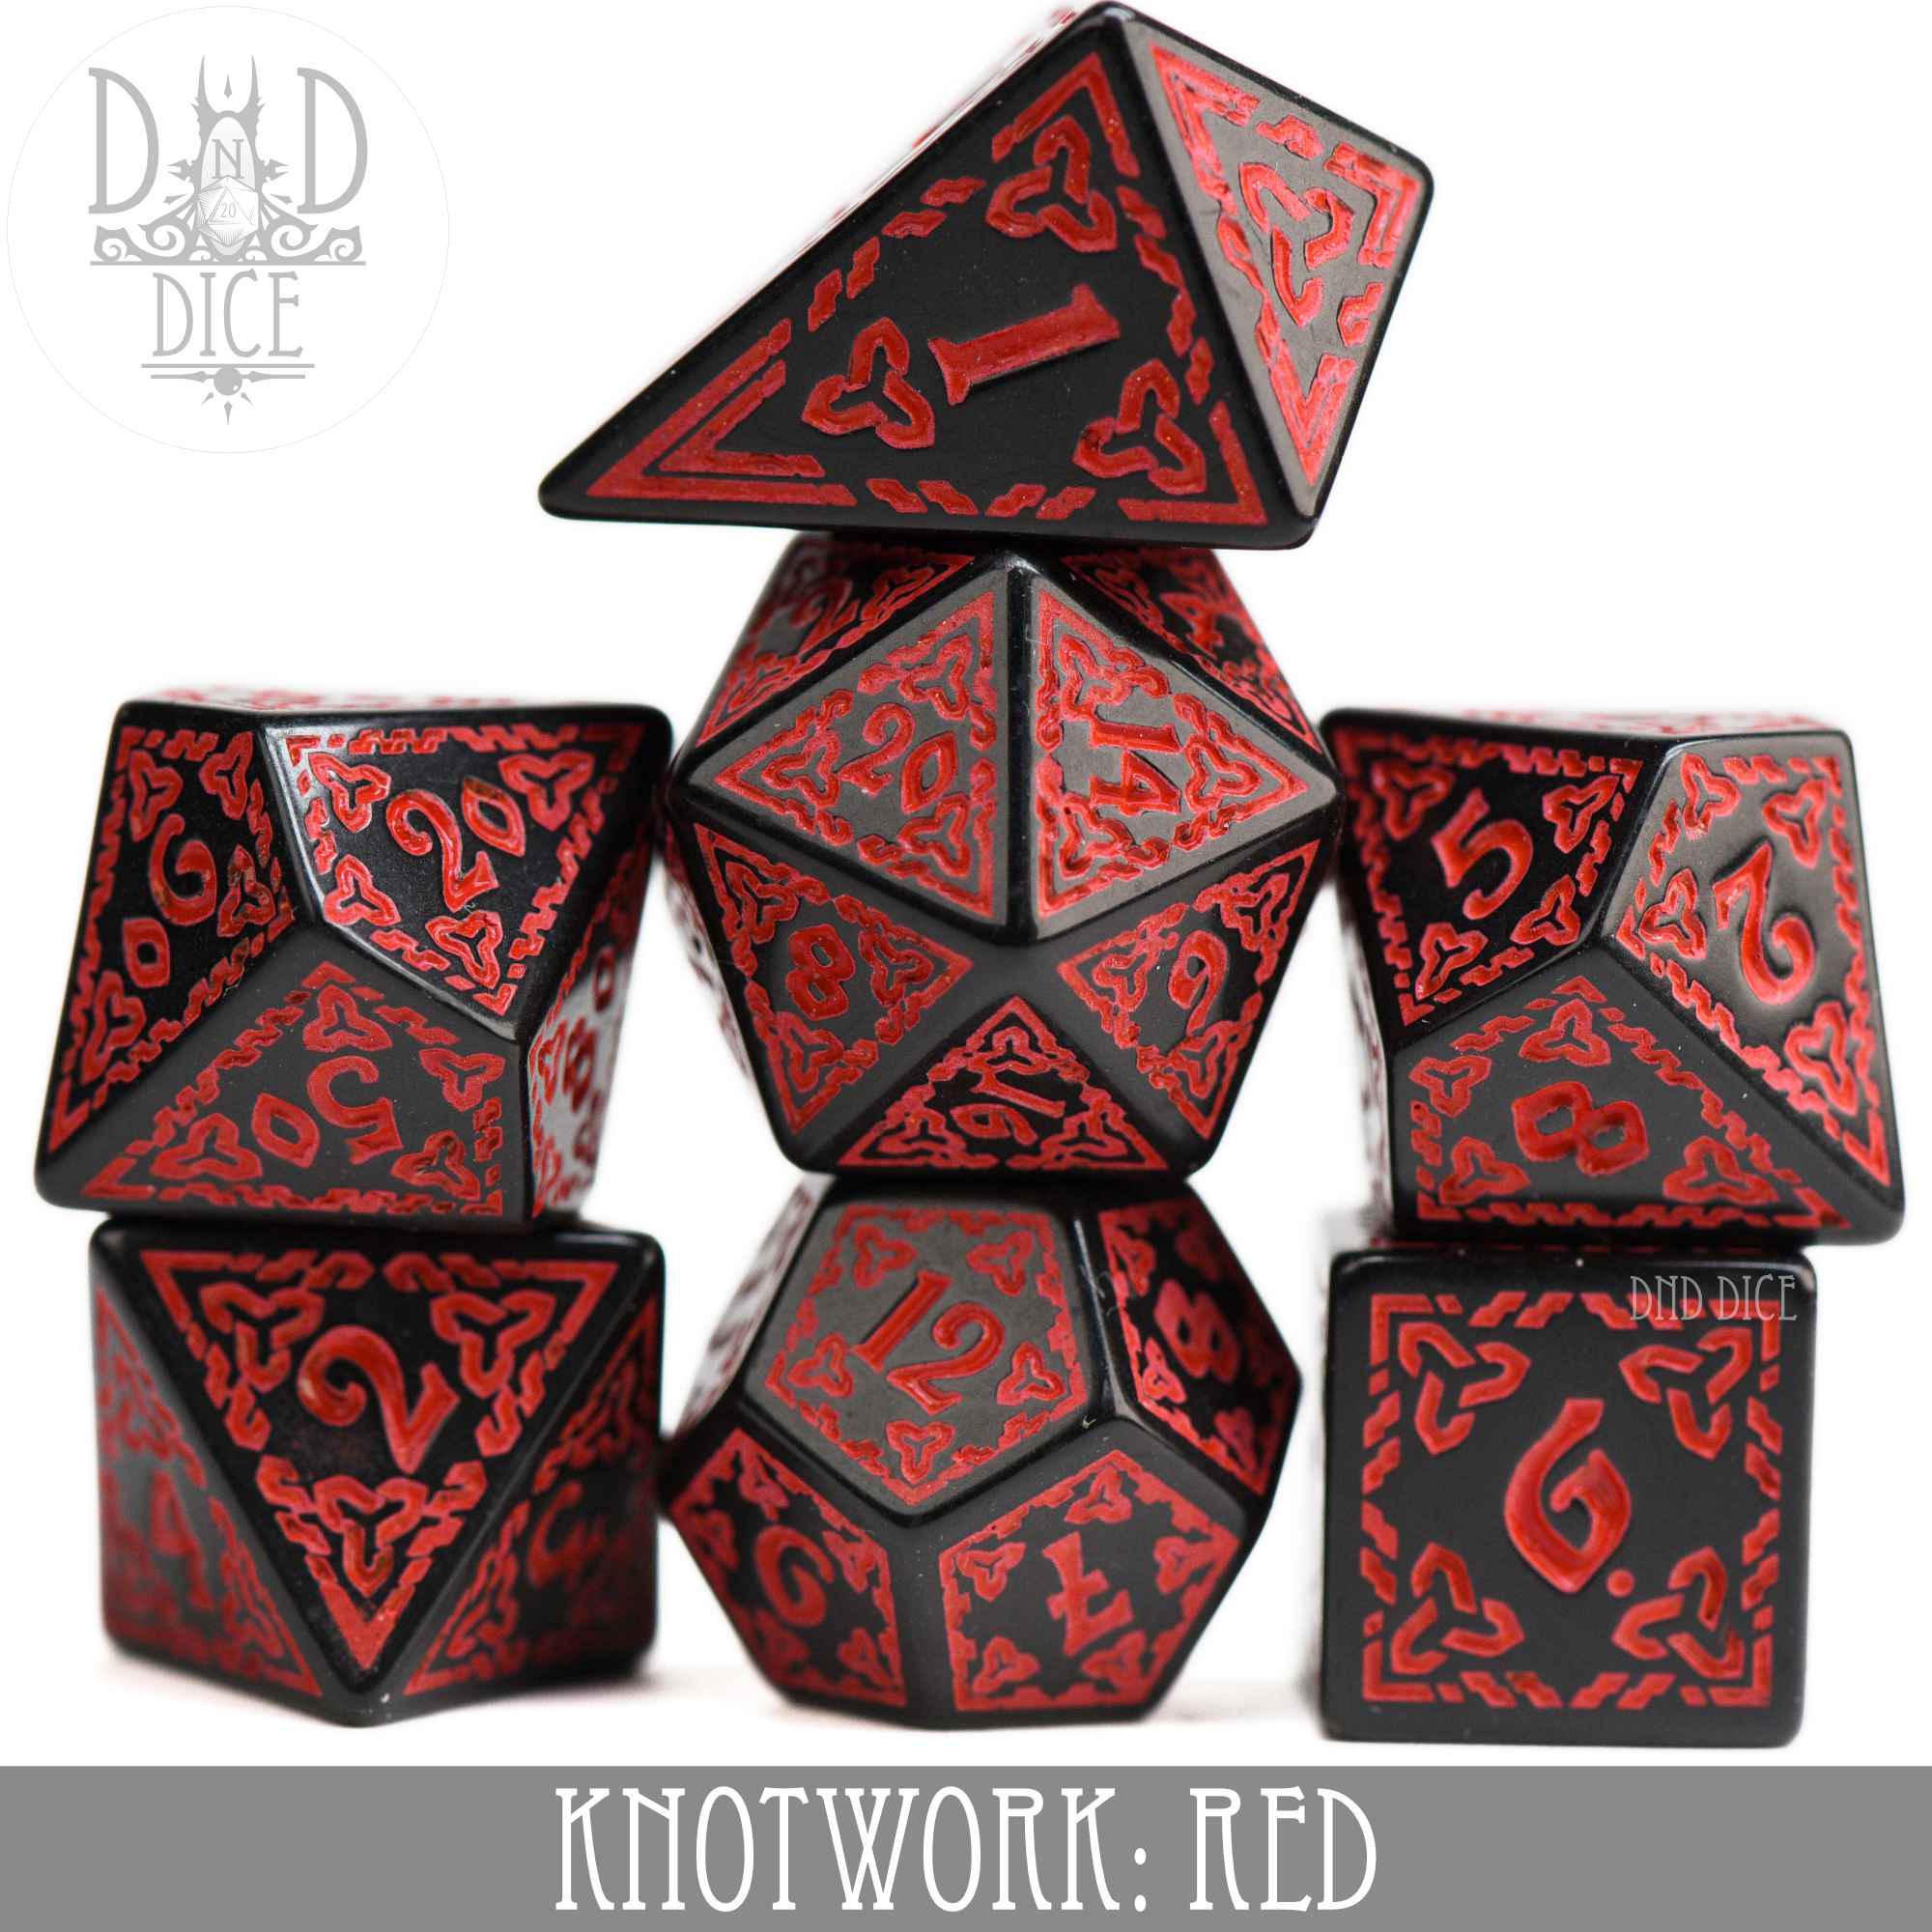 Knotwork: Red